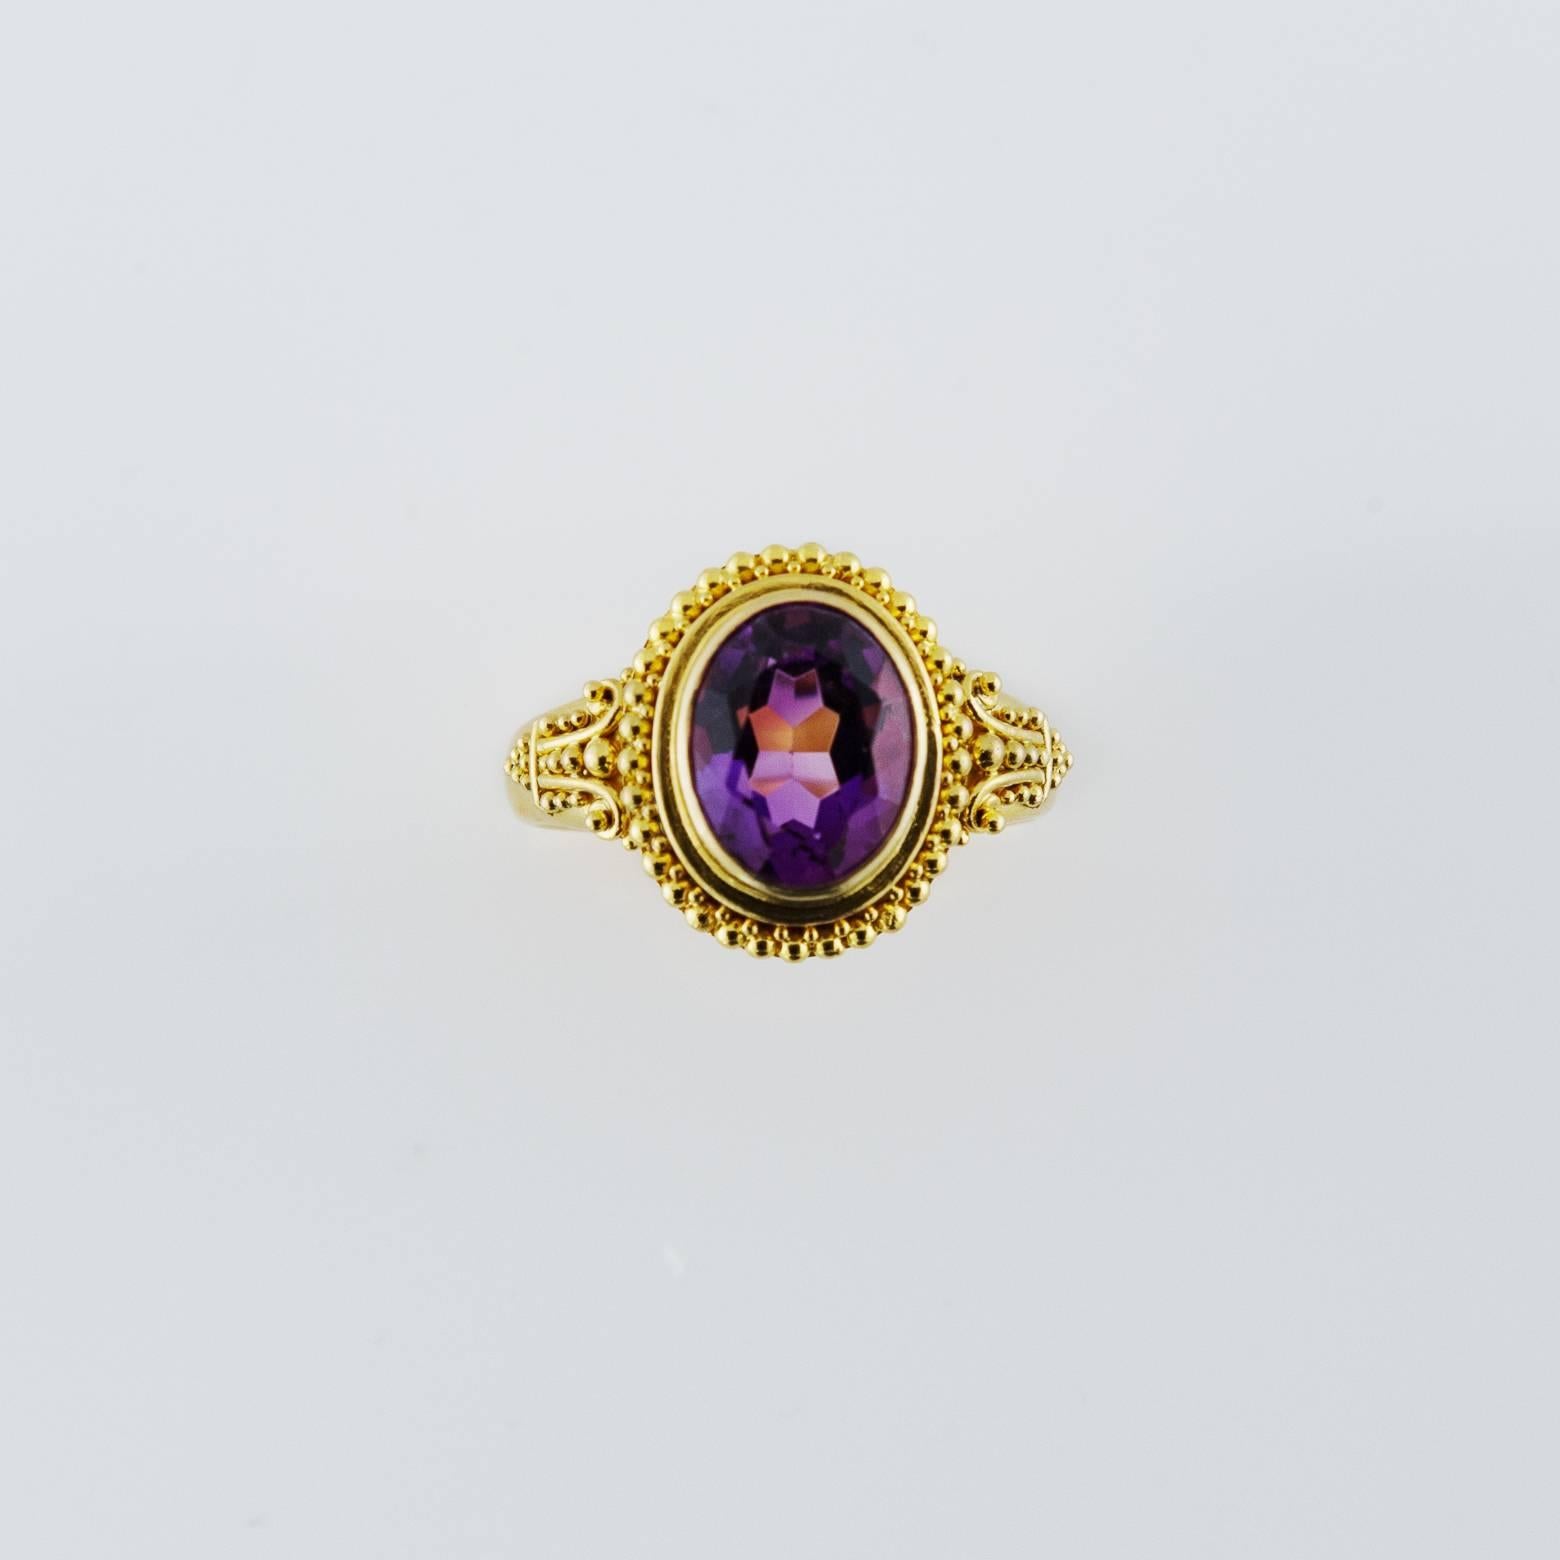 This dazzling bright amethyst ring is fit for royalty. The clarity of the amethyst is absolutely brilliant and reflects light in every direction. The texture of the bezel and design with the golden spheres looks as if it were taken from the